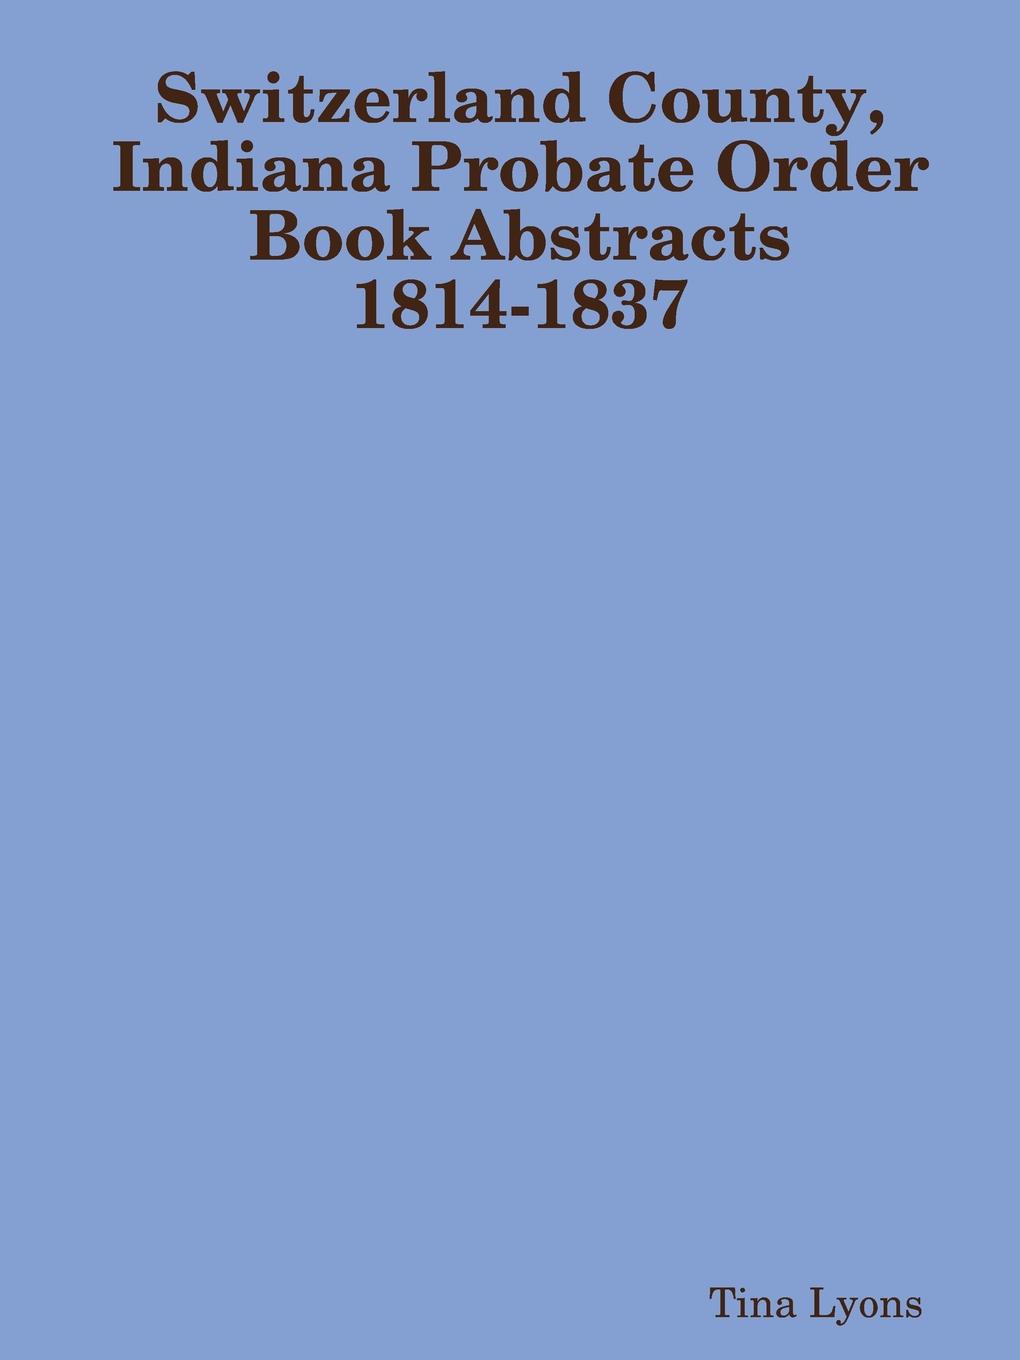 Switzerland County, Indiana Probate Order Book Abstracts 1814-1837